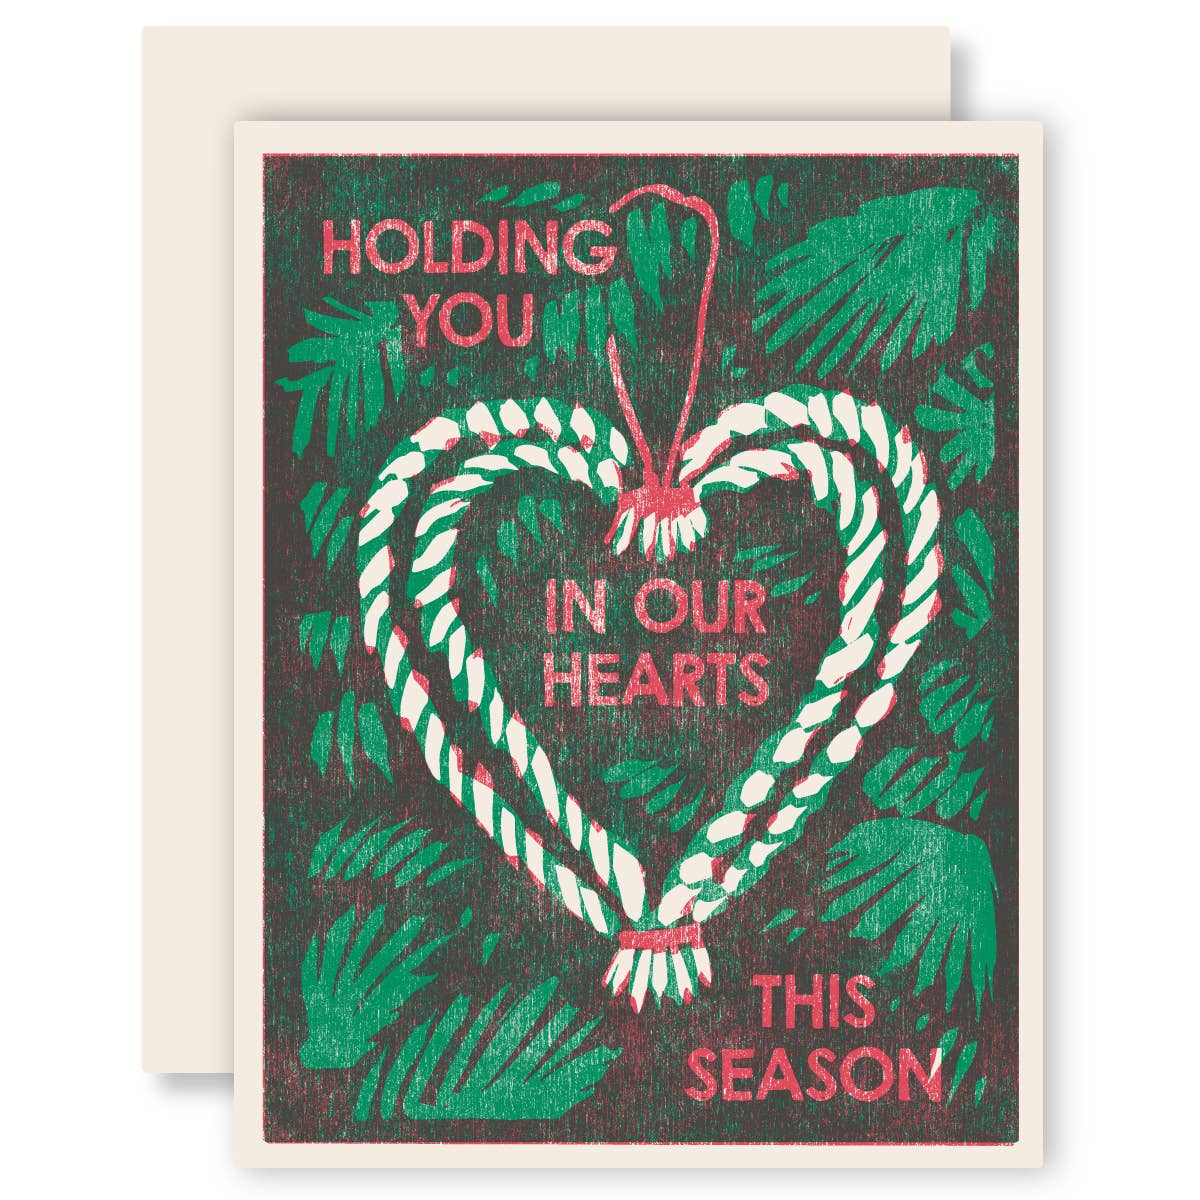 "In Our Hearts This Season" Letterpress Card